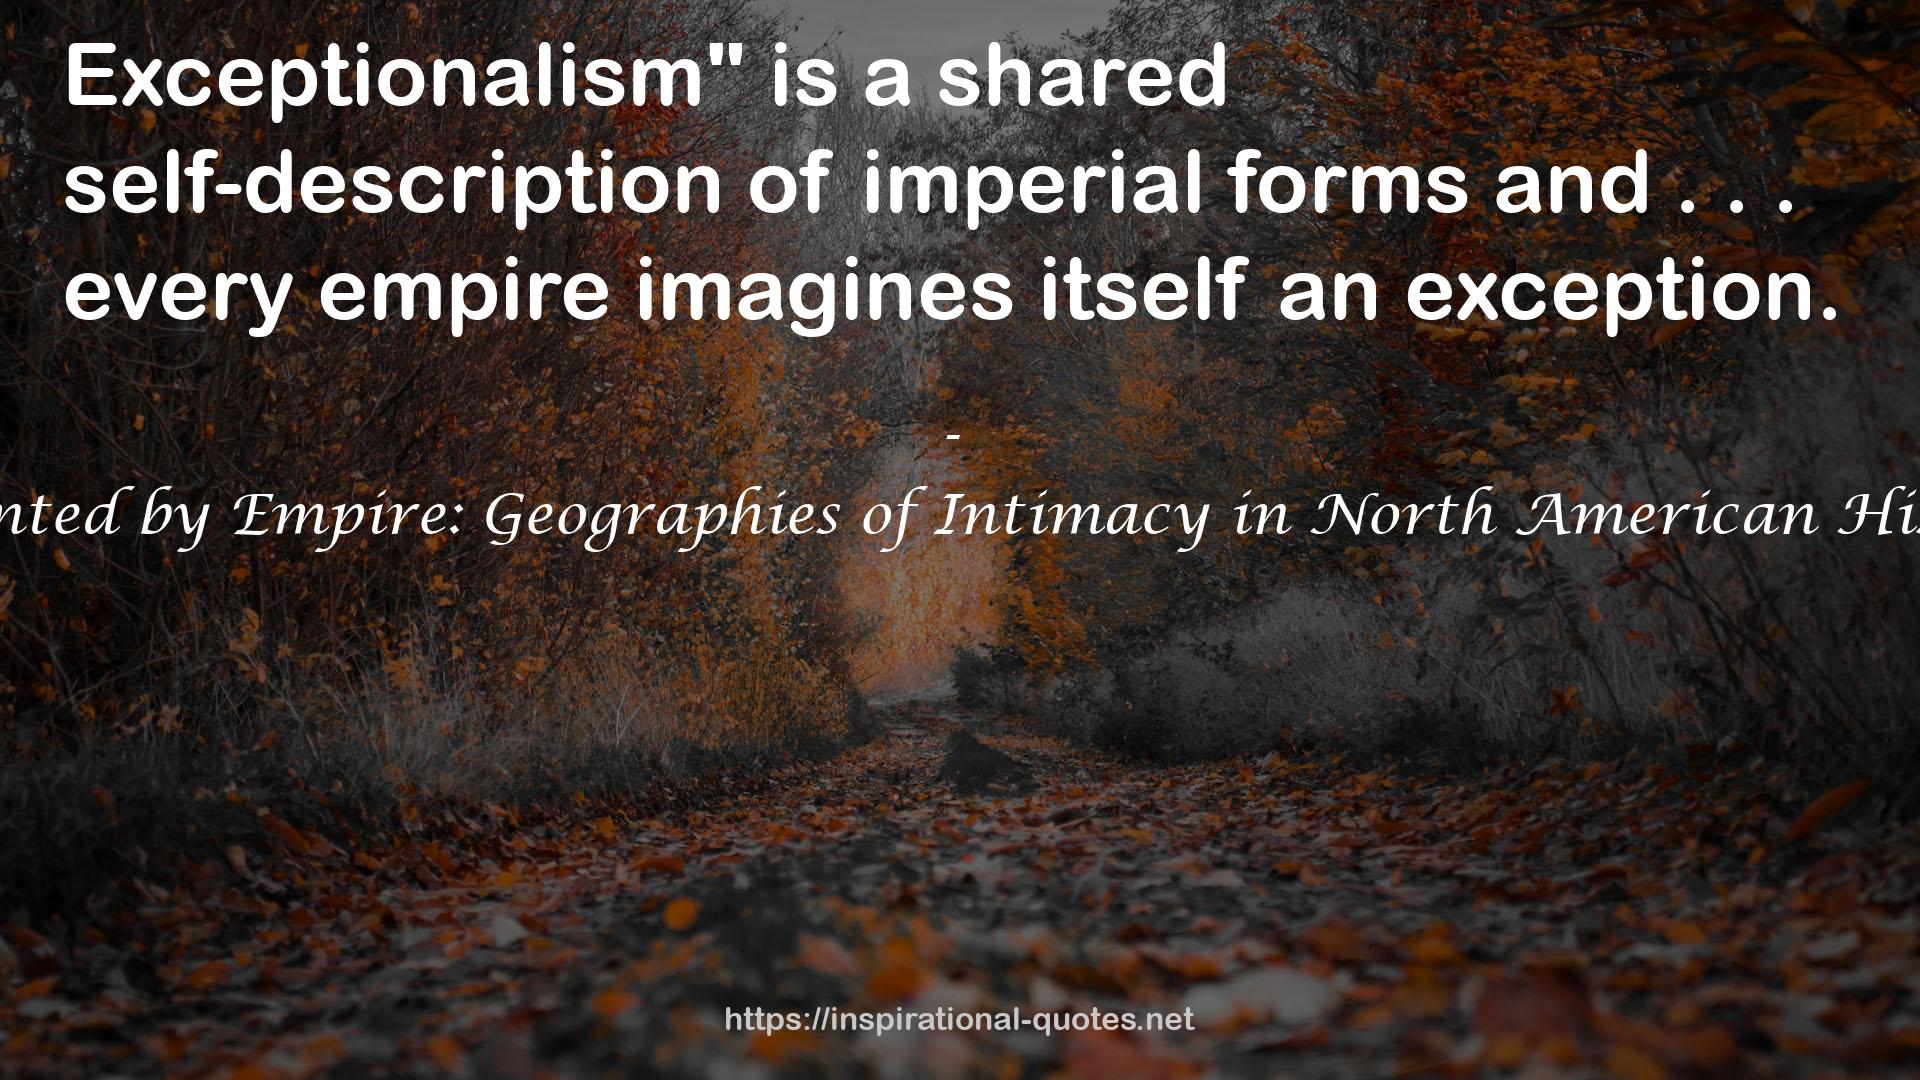 Haunted by Empire: Geographies of Intimacy in North American History QUOTES